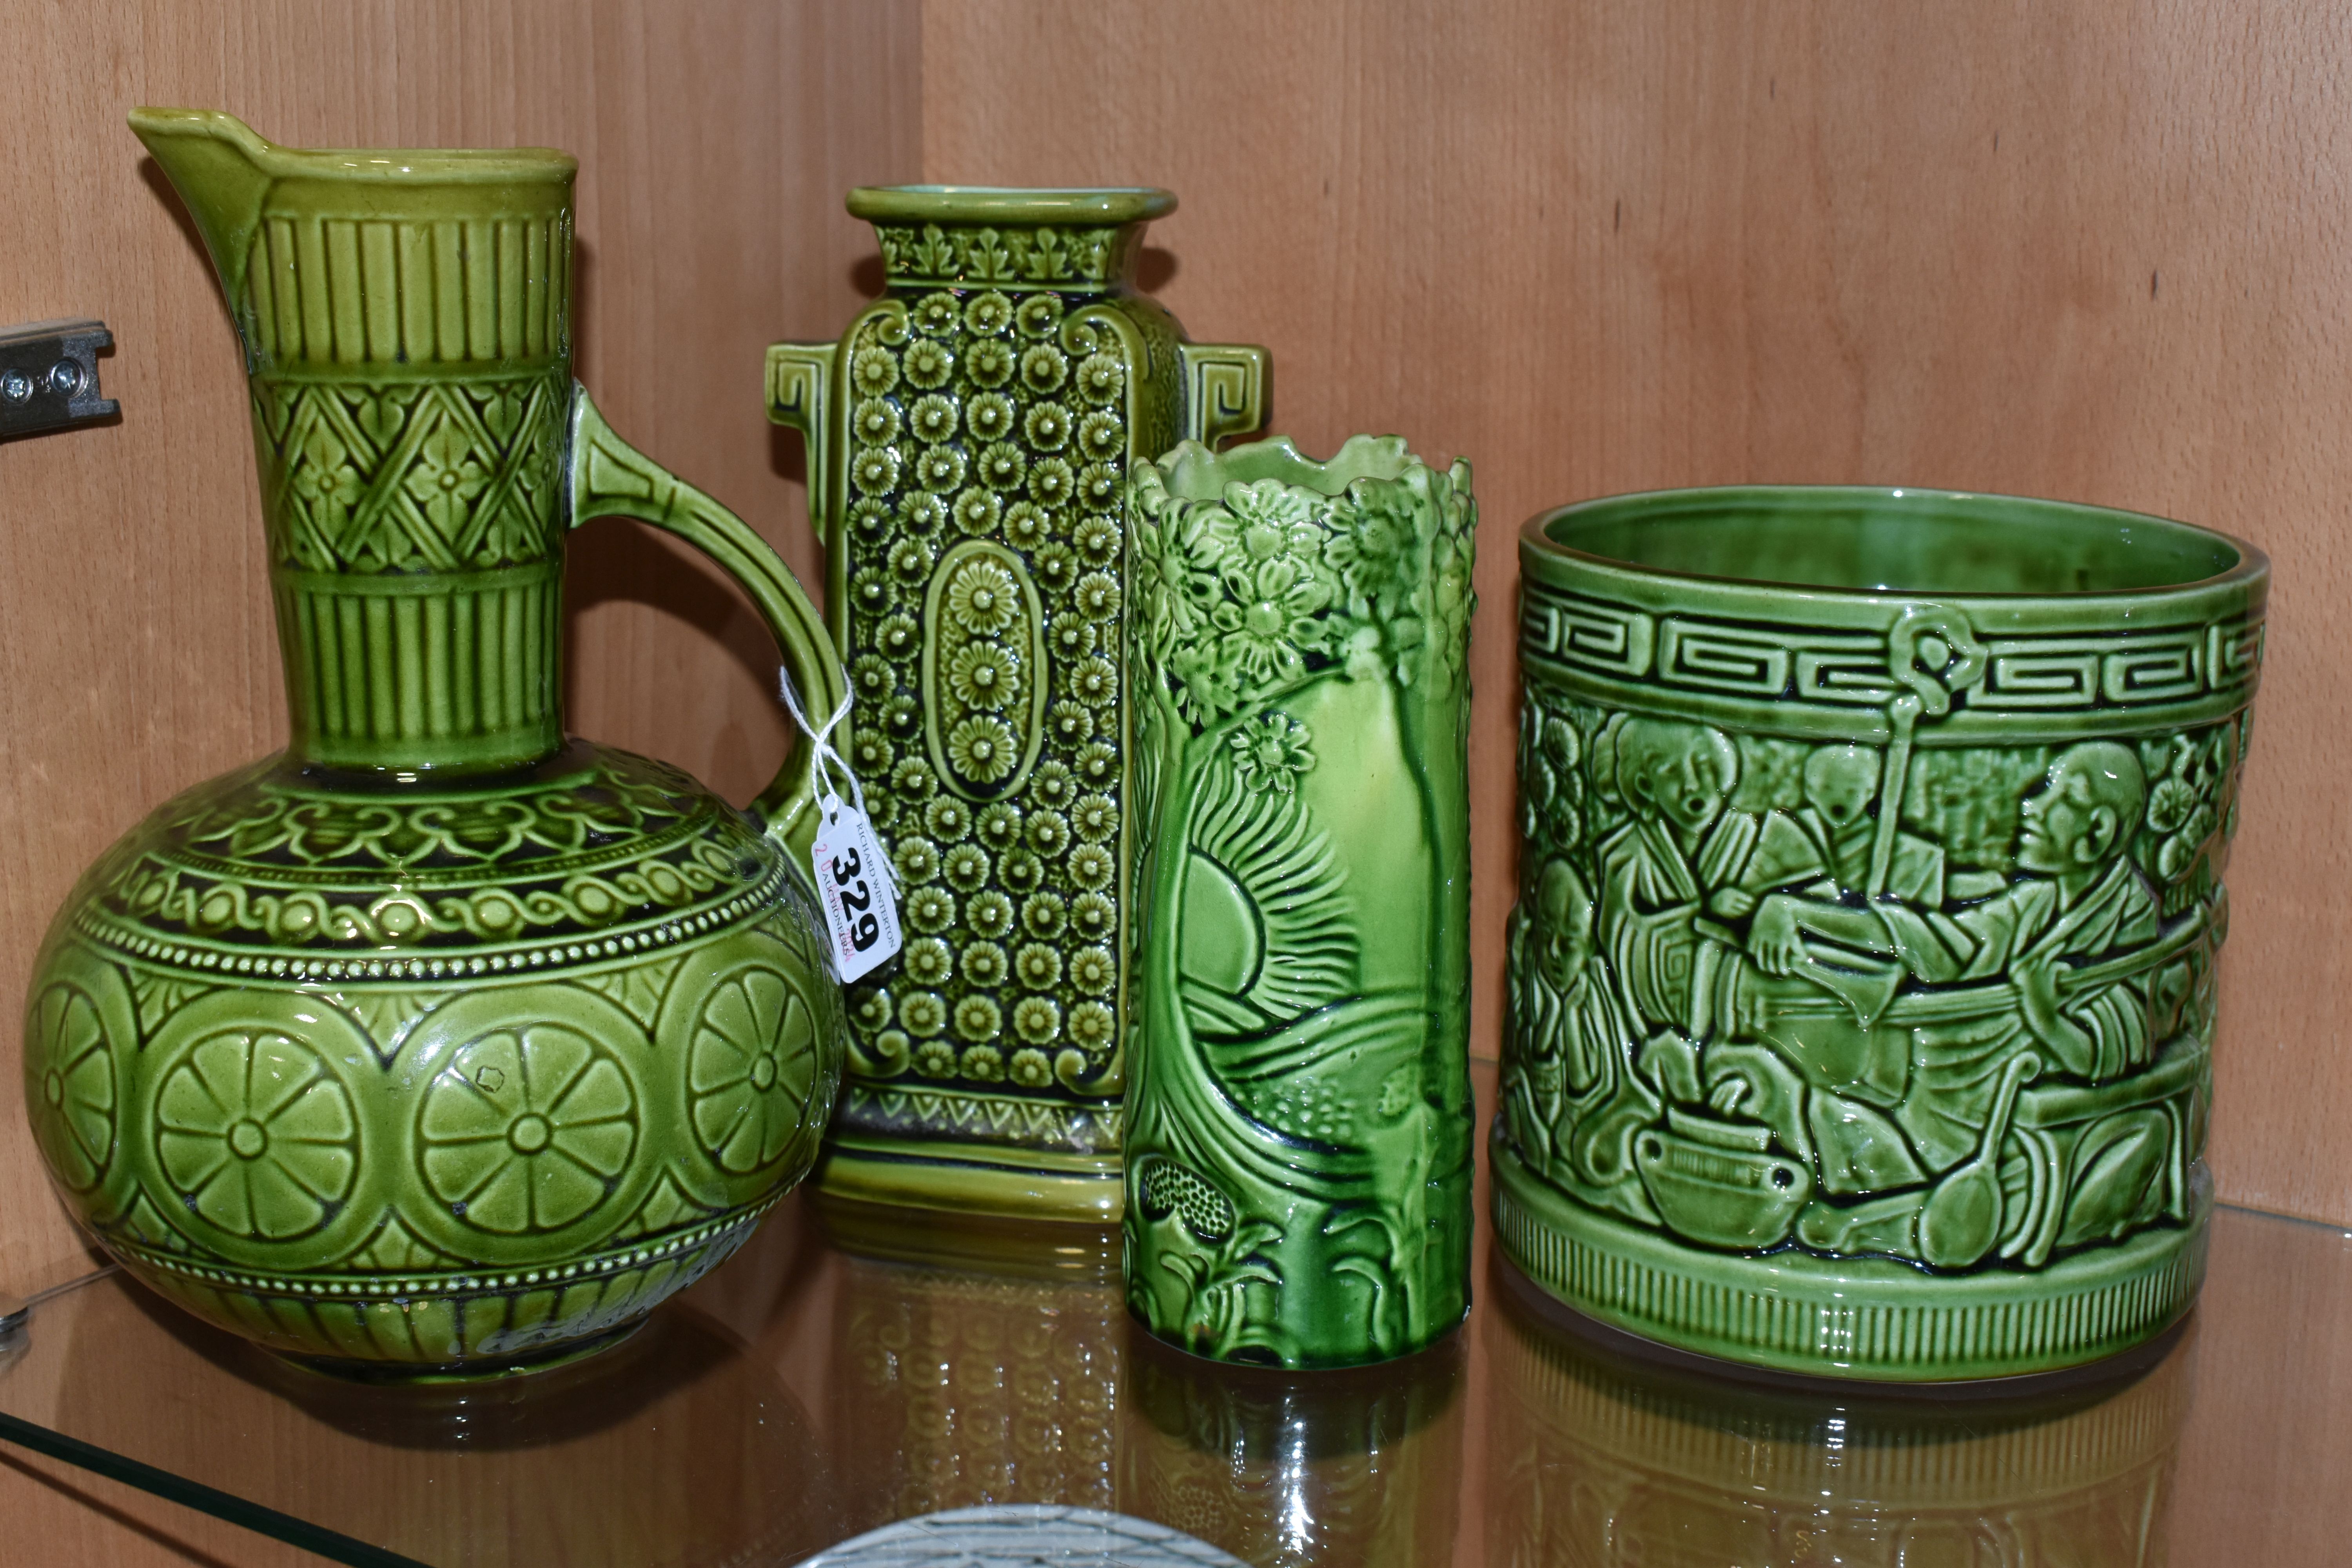 FOUR PIECES OF GREEN GLAZED POTTERY, comprising a Lear green glazed jug marked 'Lear 145', a Lear